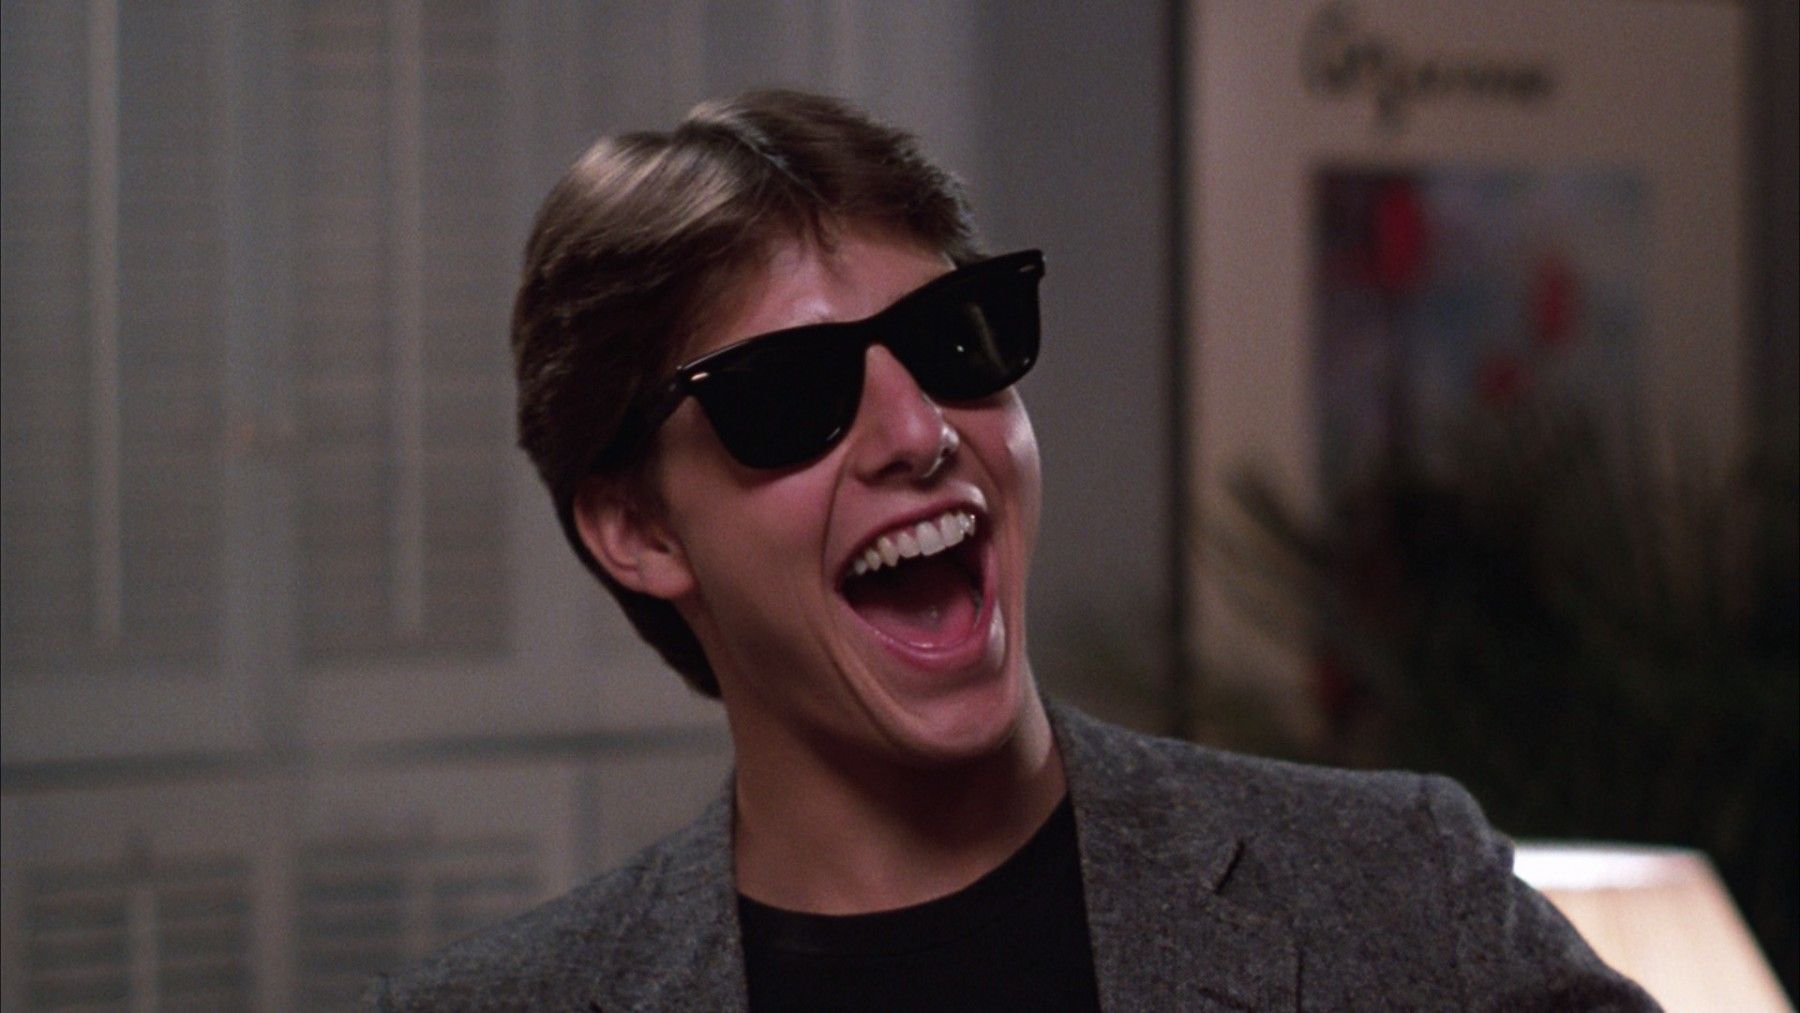 Risky Business at 35: Watching Tom Cruise Play the Loser | Collider